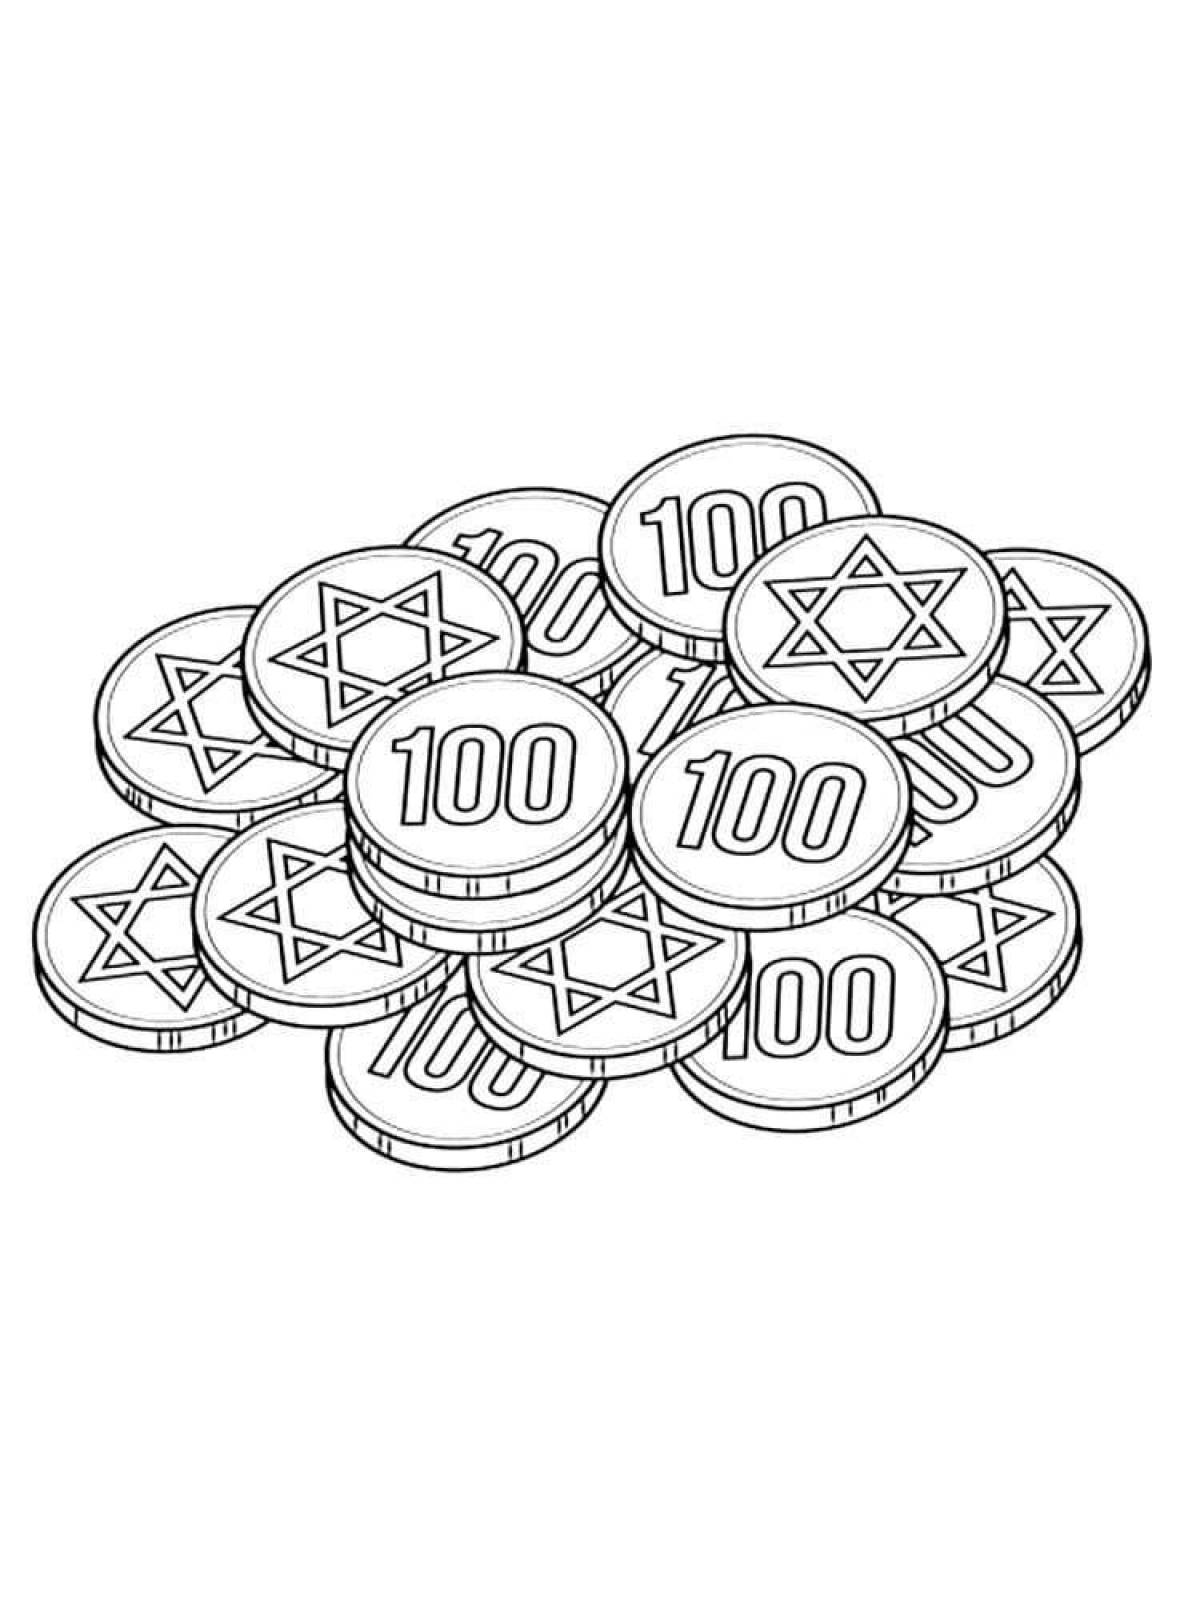 Luminous coin coloring page